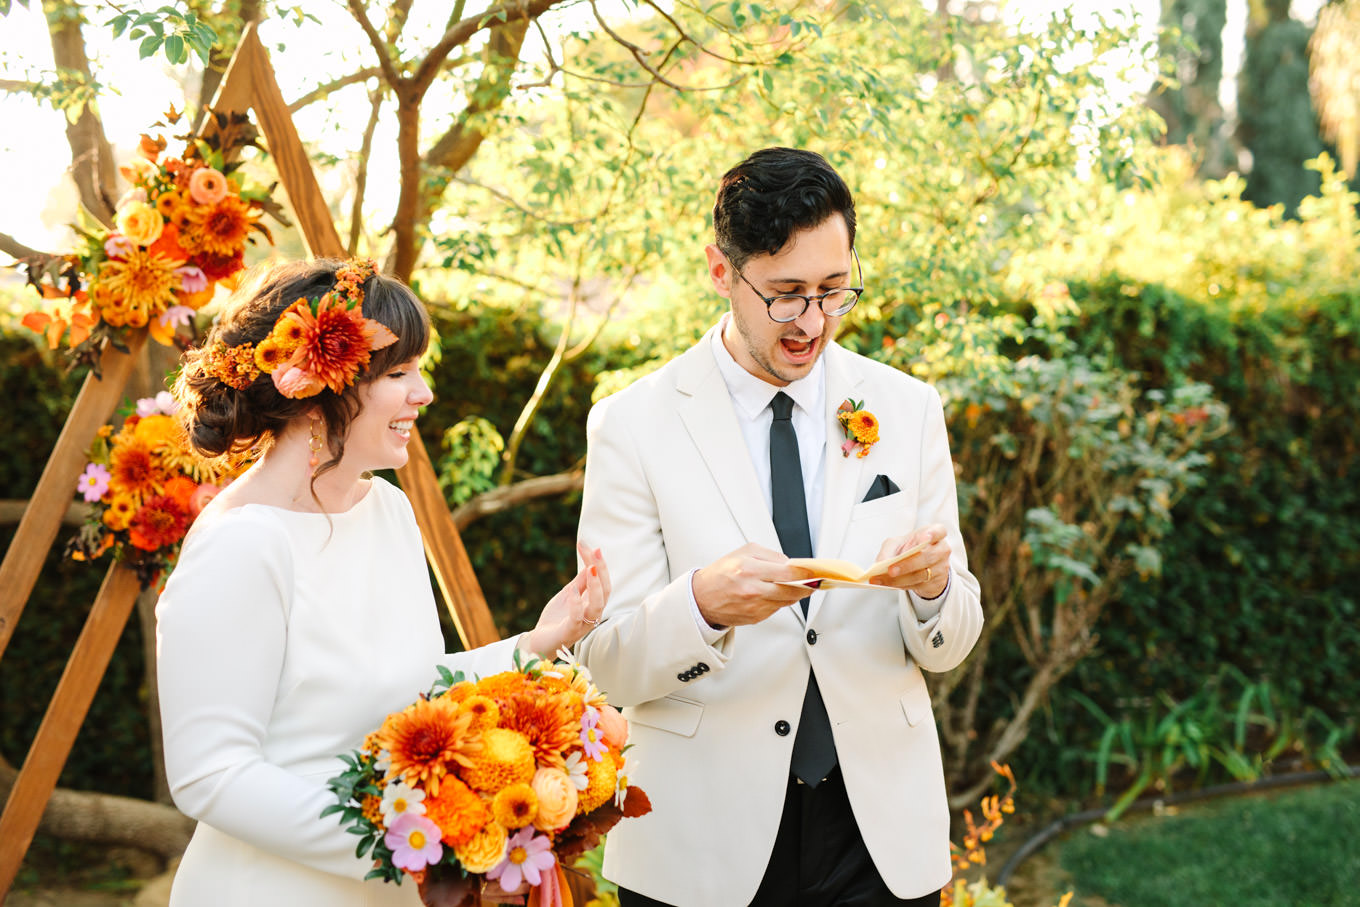 Groom reading a personal note to the bride | Vibrant backyard micro wedding featured on Green Wedding Shoes | Colorful LA wedding photography | #losangeleswedding #backyardwedding #microwedding #laweddingphotographer Source: Mary Costa Photography | Los Angeles